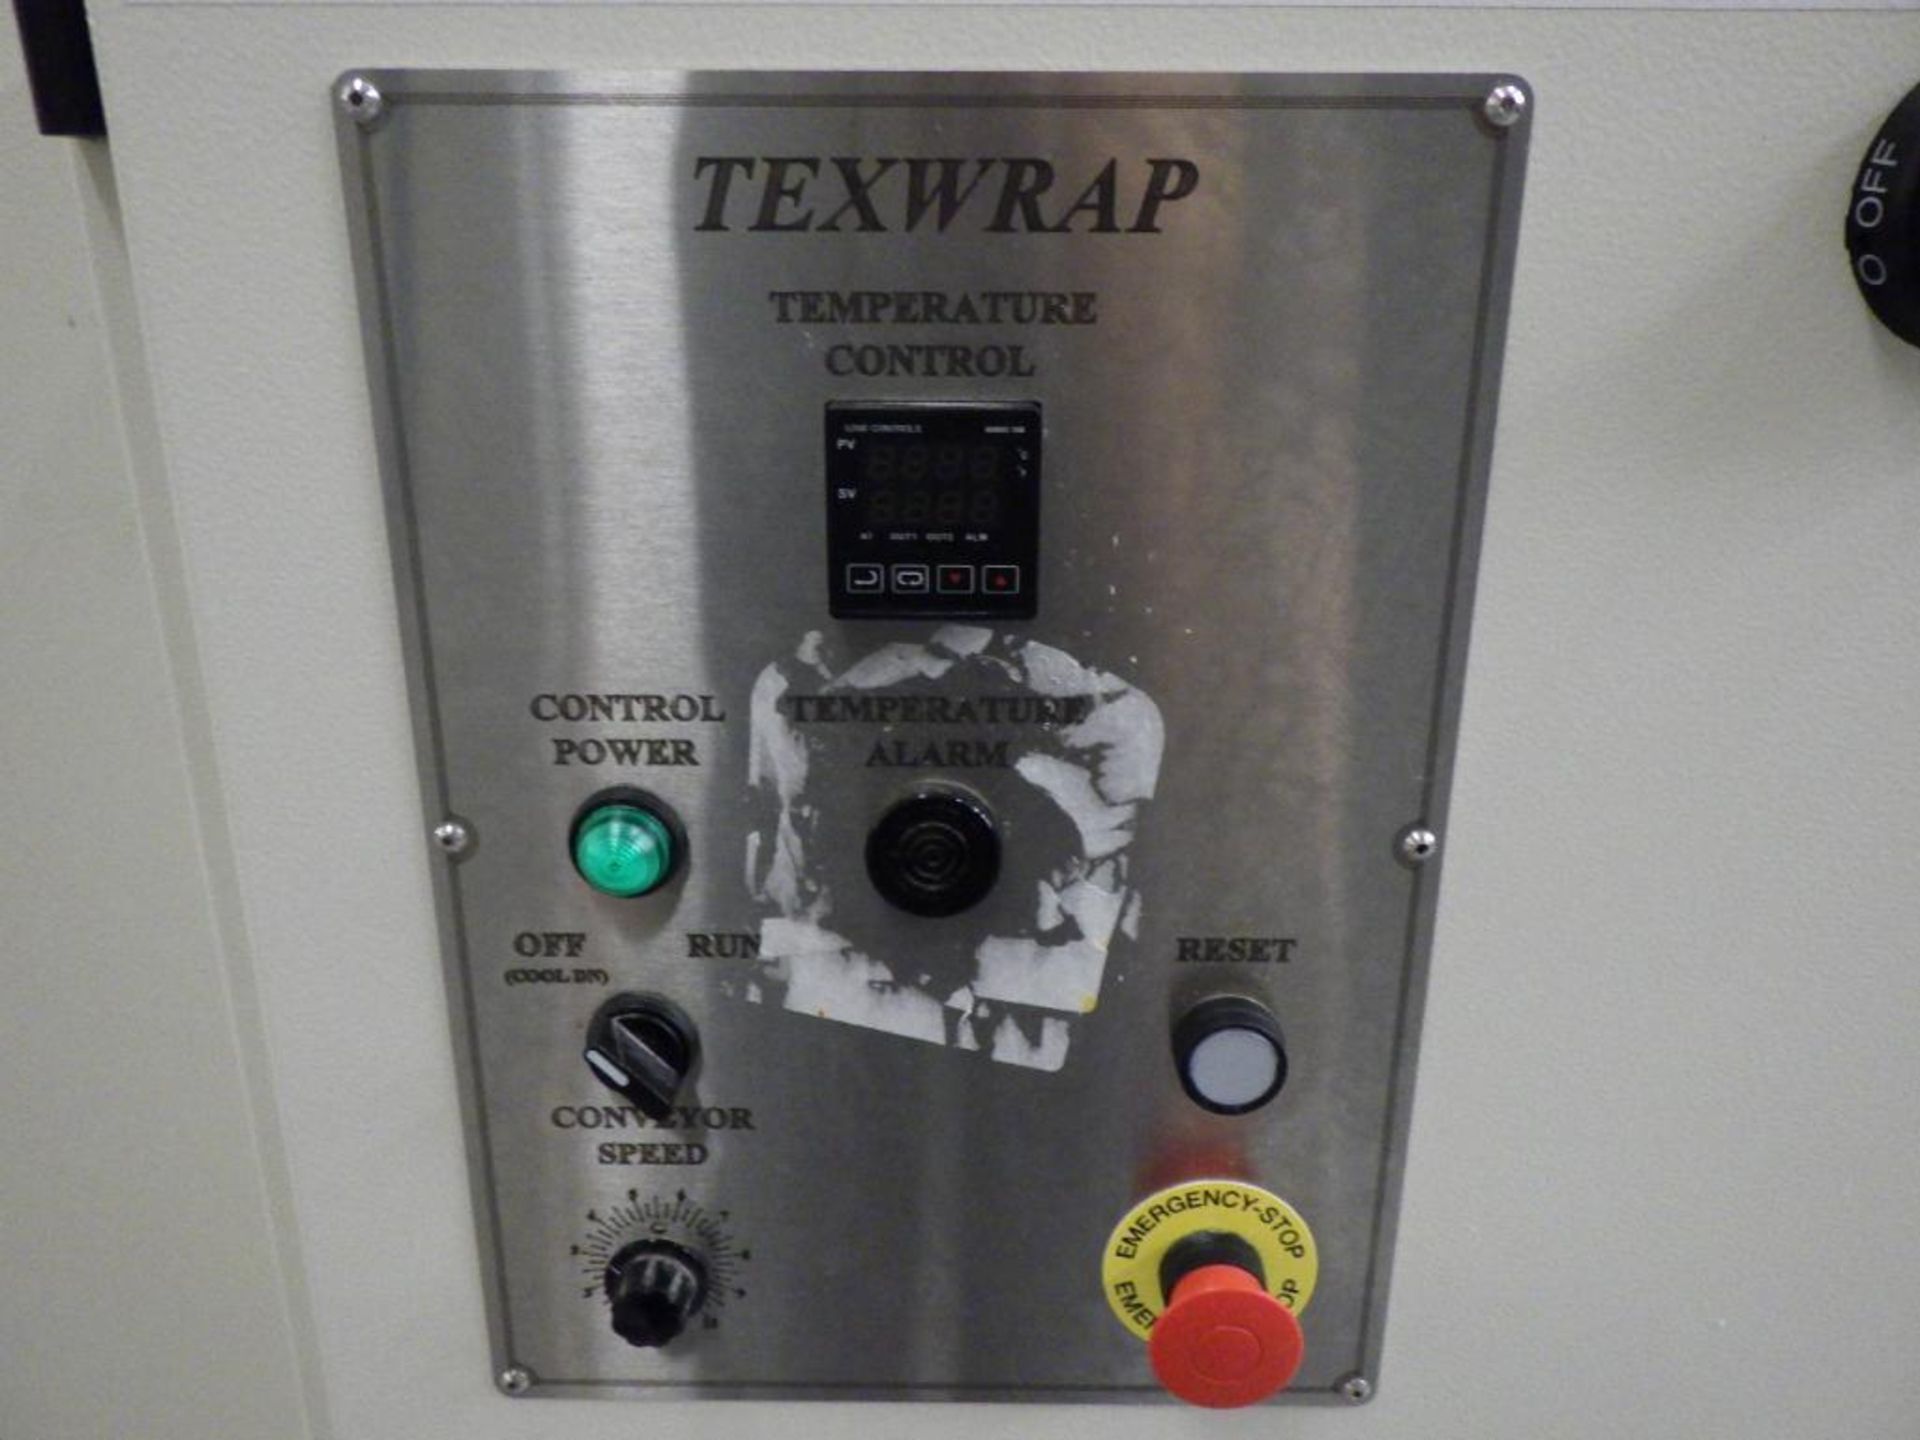 2019 Texwrap Wrapper With Shrink Tunnel - Image 89 of 106